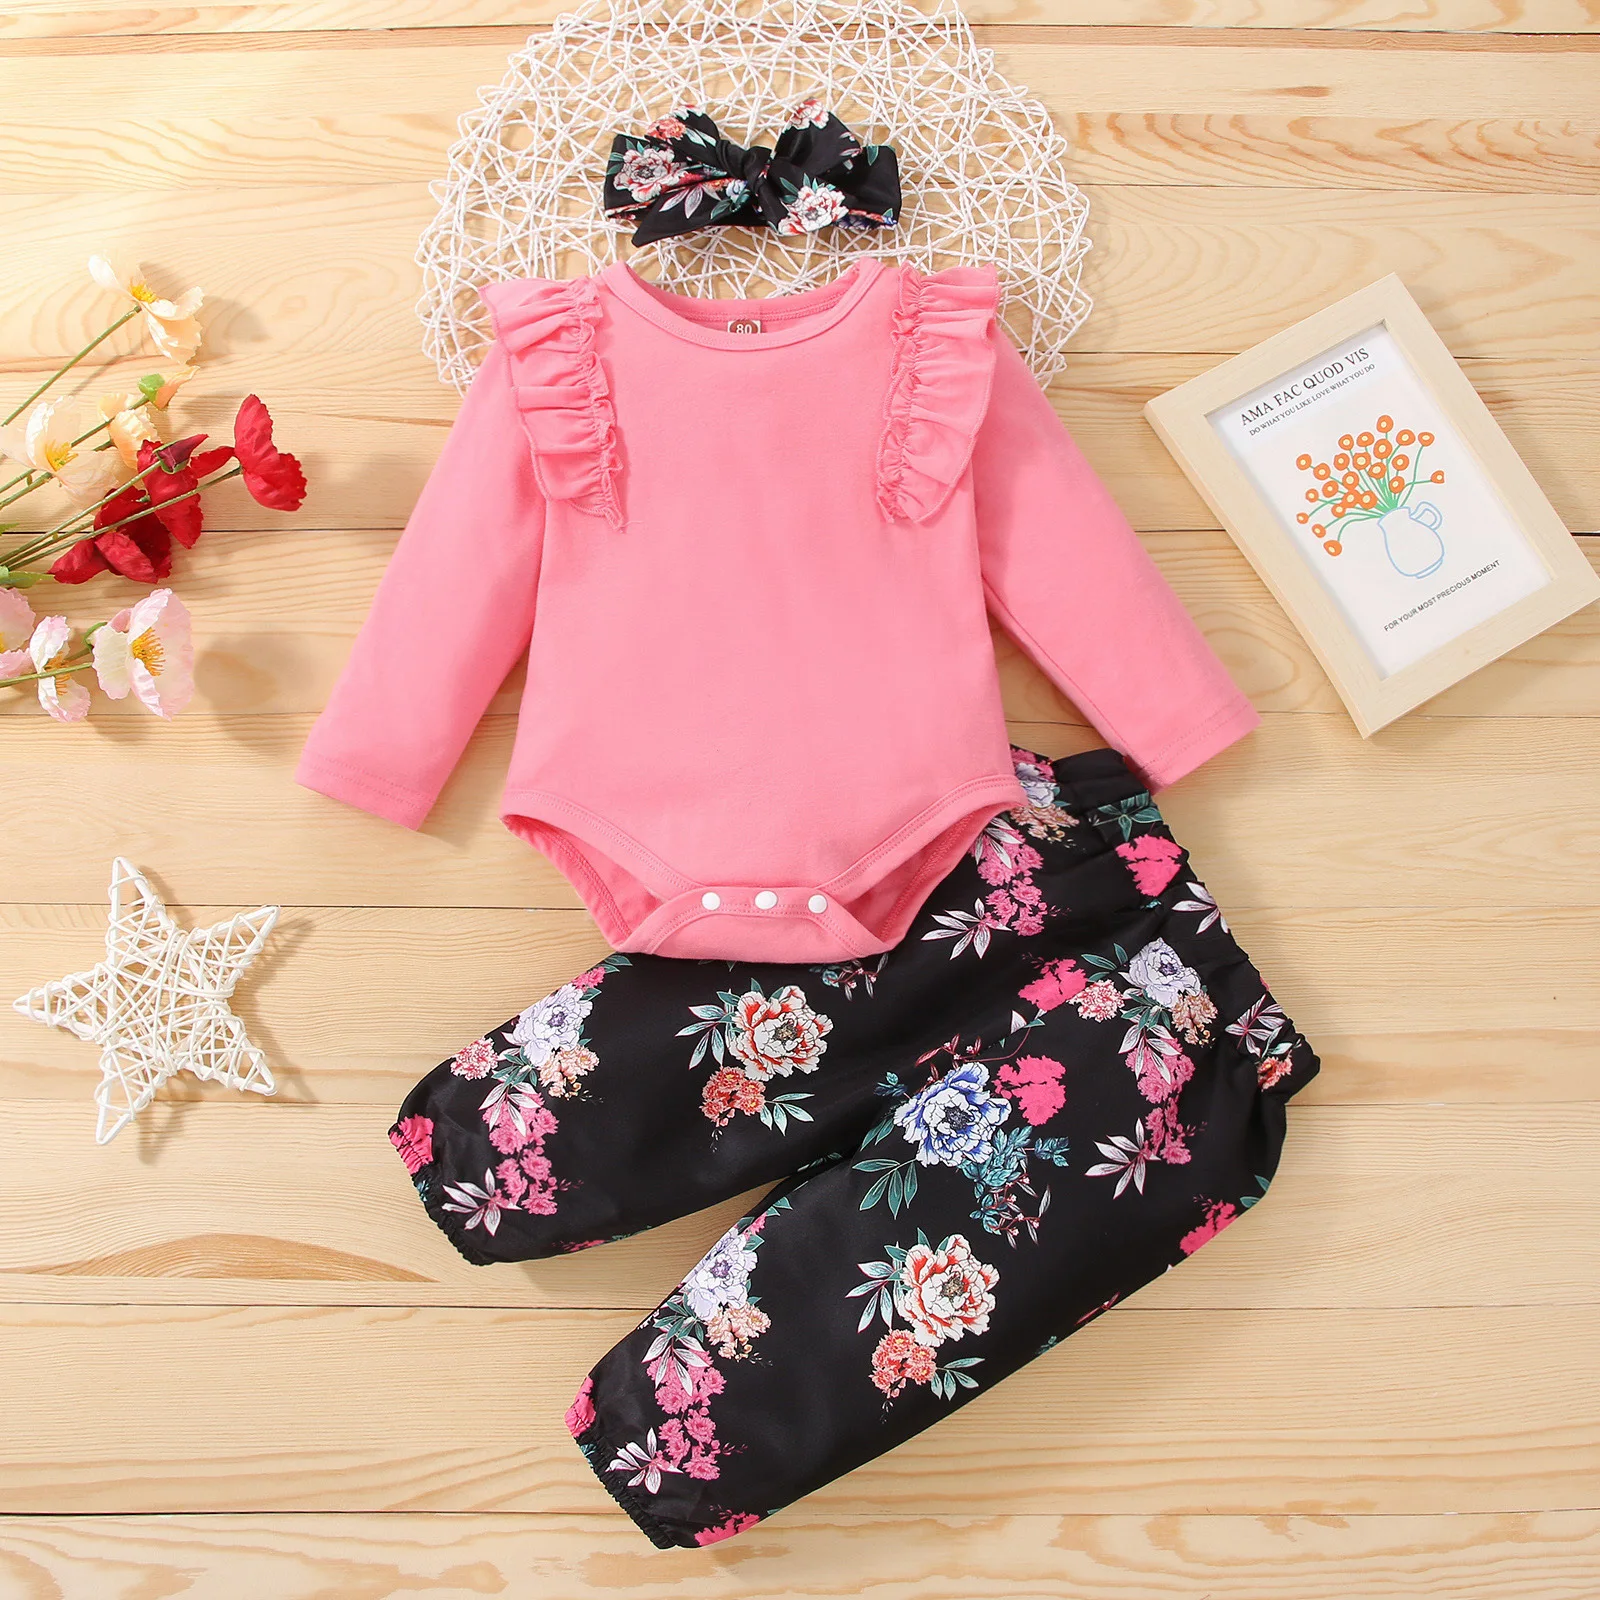 Trousers Fall Winter Newborn Baby Girl Clothes Lounge Set Long Sleeve Top Floral Pants Headband 3 6 12 18 Month Kids Children Outfit